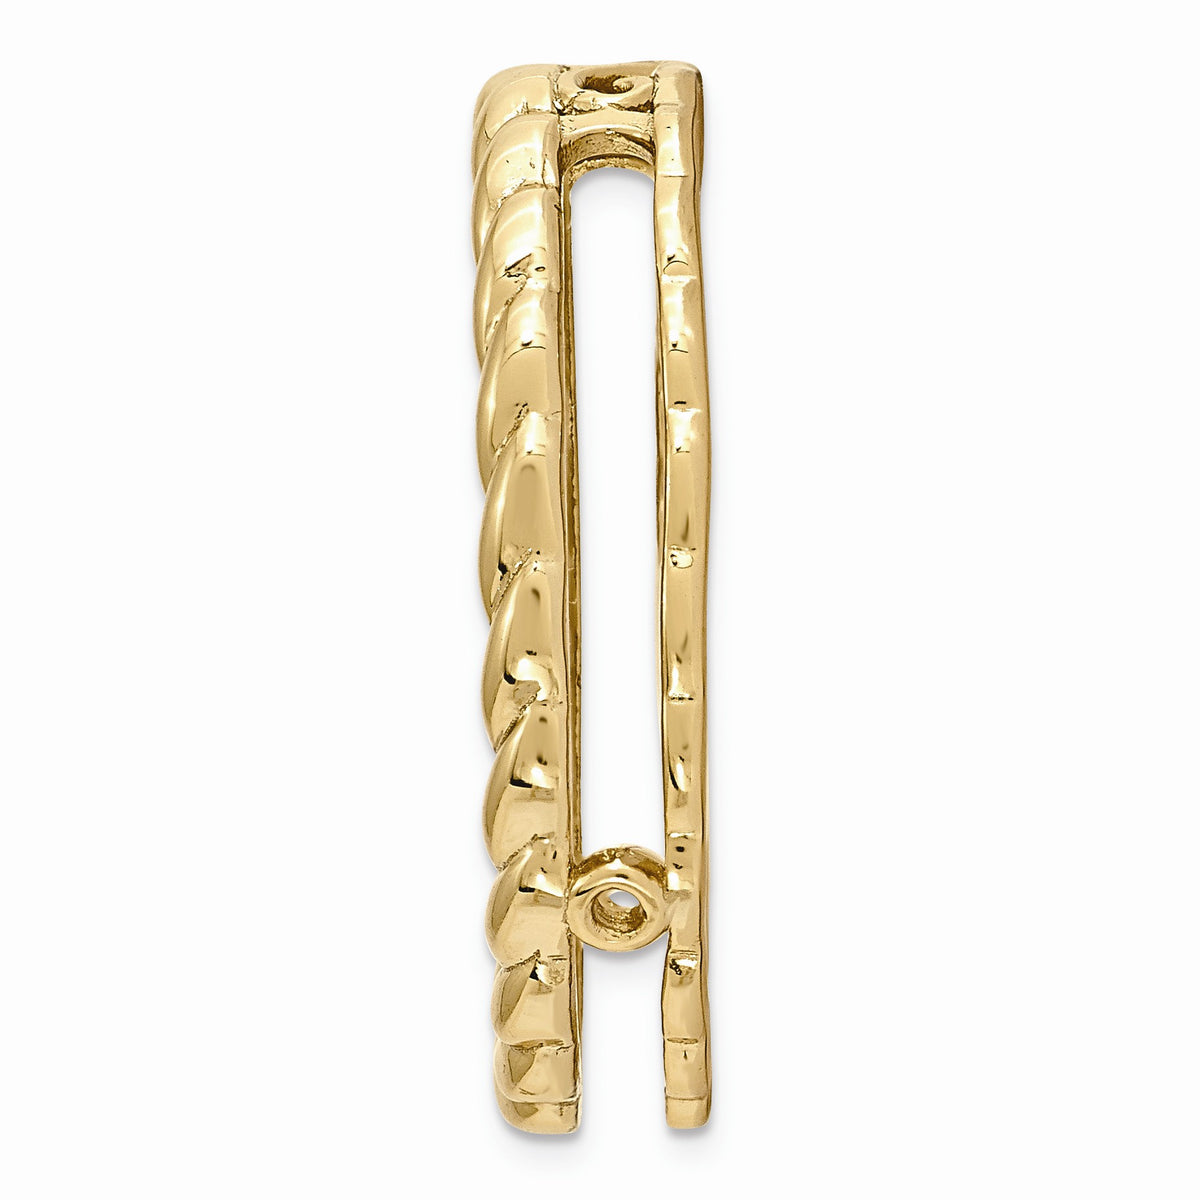 Alternate view of the Gold-Tone Sterling Silver Stackable Medium Rope Slide, 20mm by The Black Bow Jewelry Co.